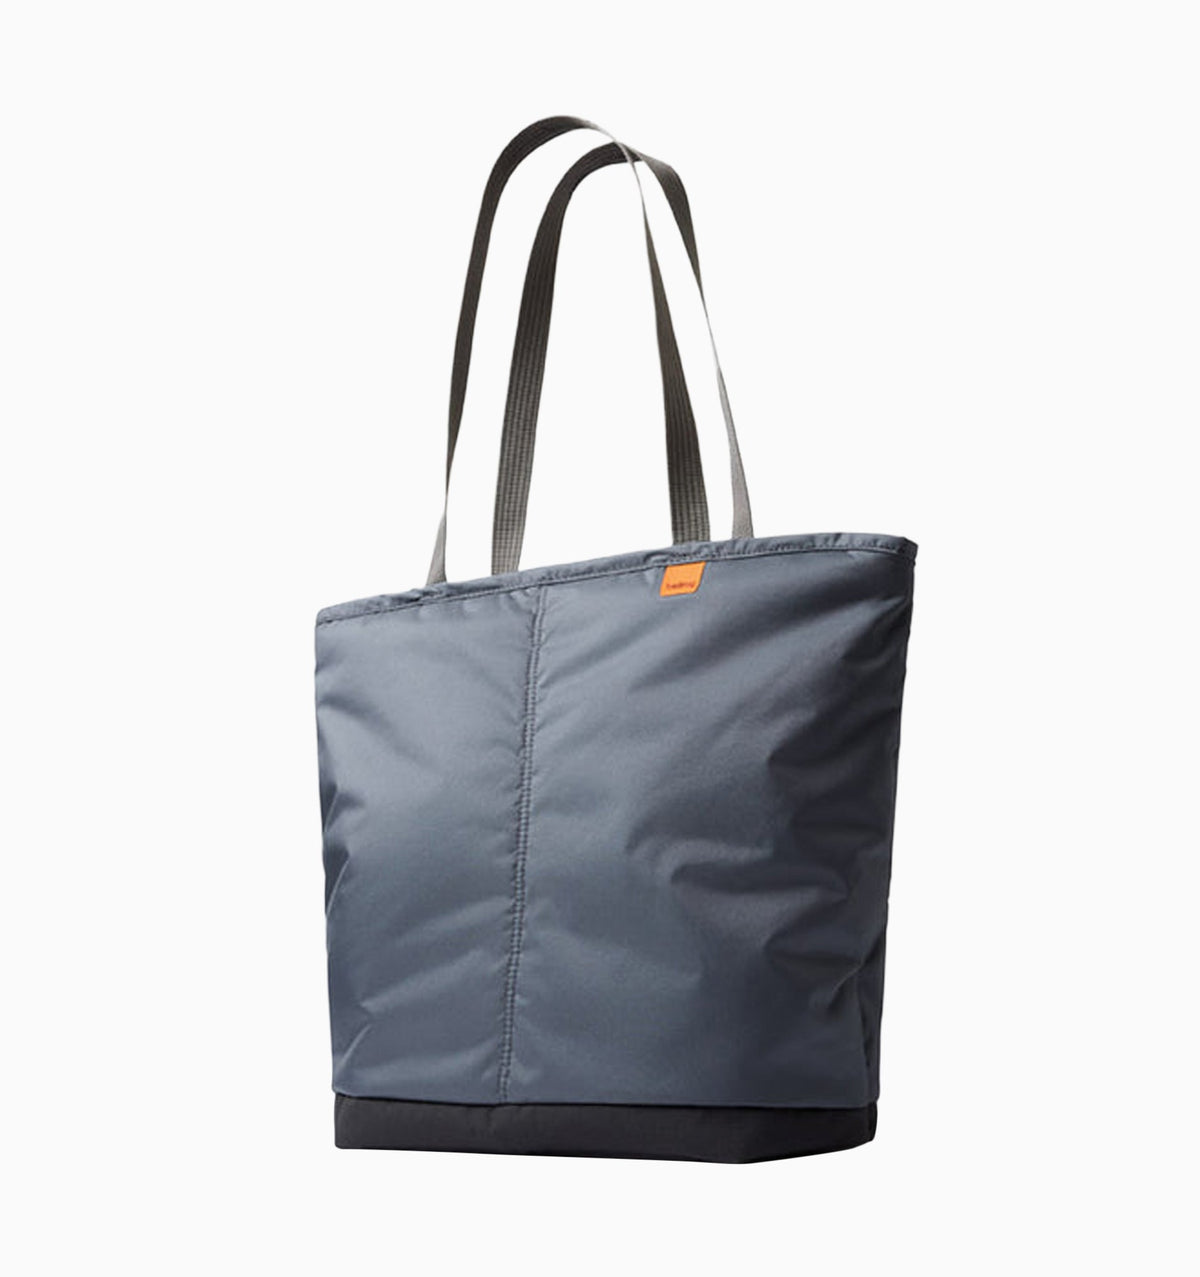 Bellroy Cooler Tote 16L - Charcoal